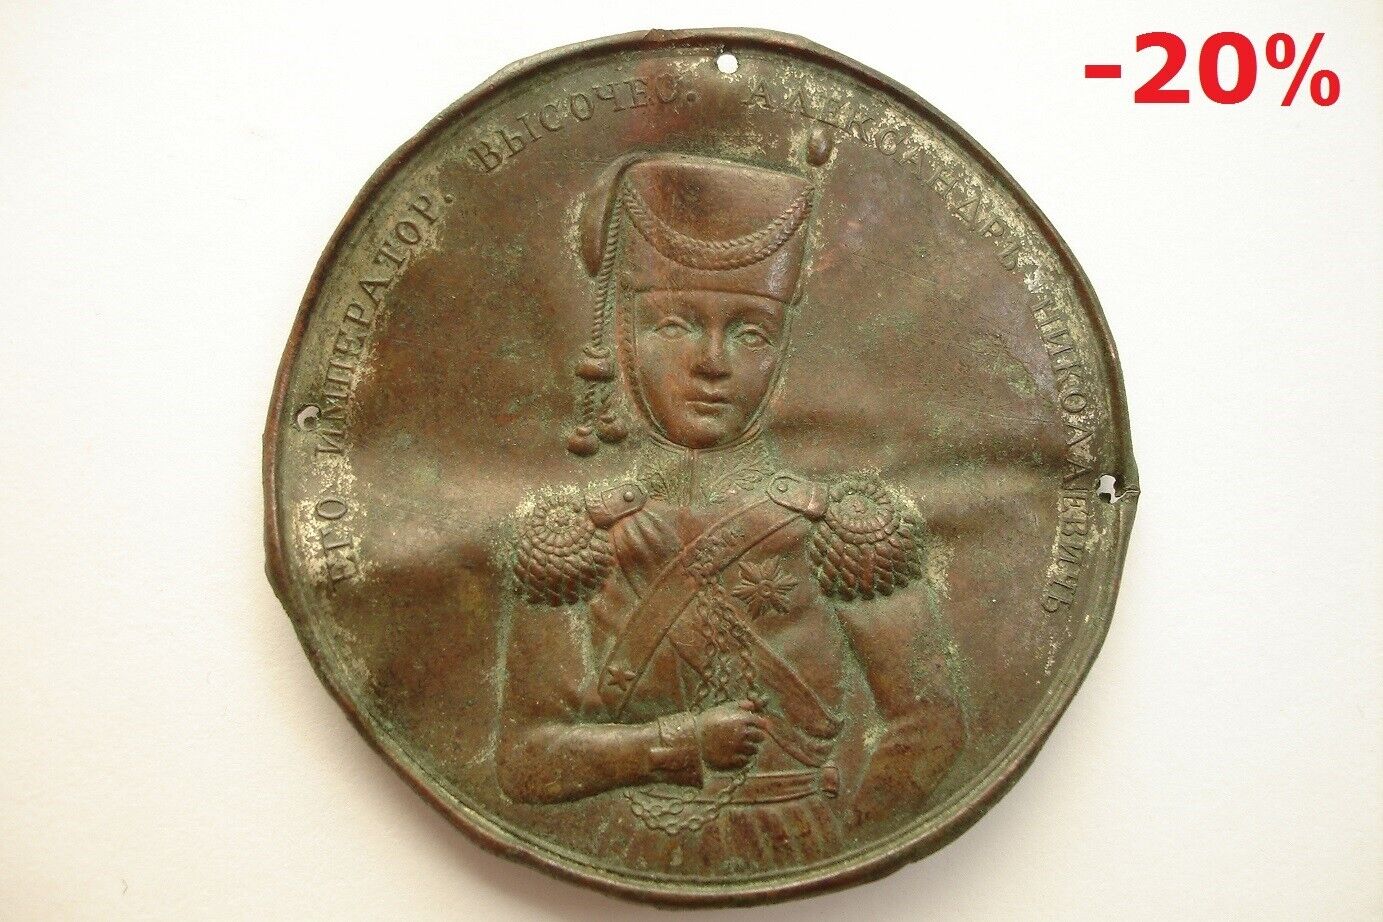 Russian Imperial Copper Plaque depicting the Heir to the Russian Throne 1820s